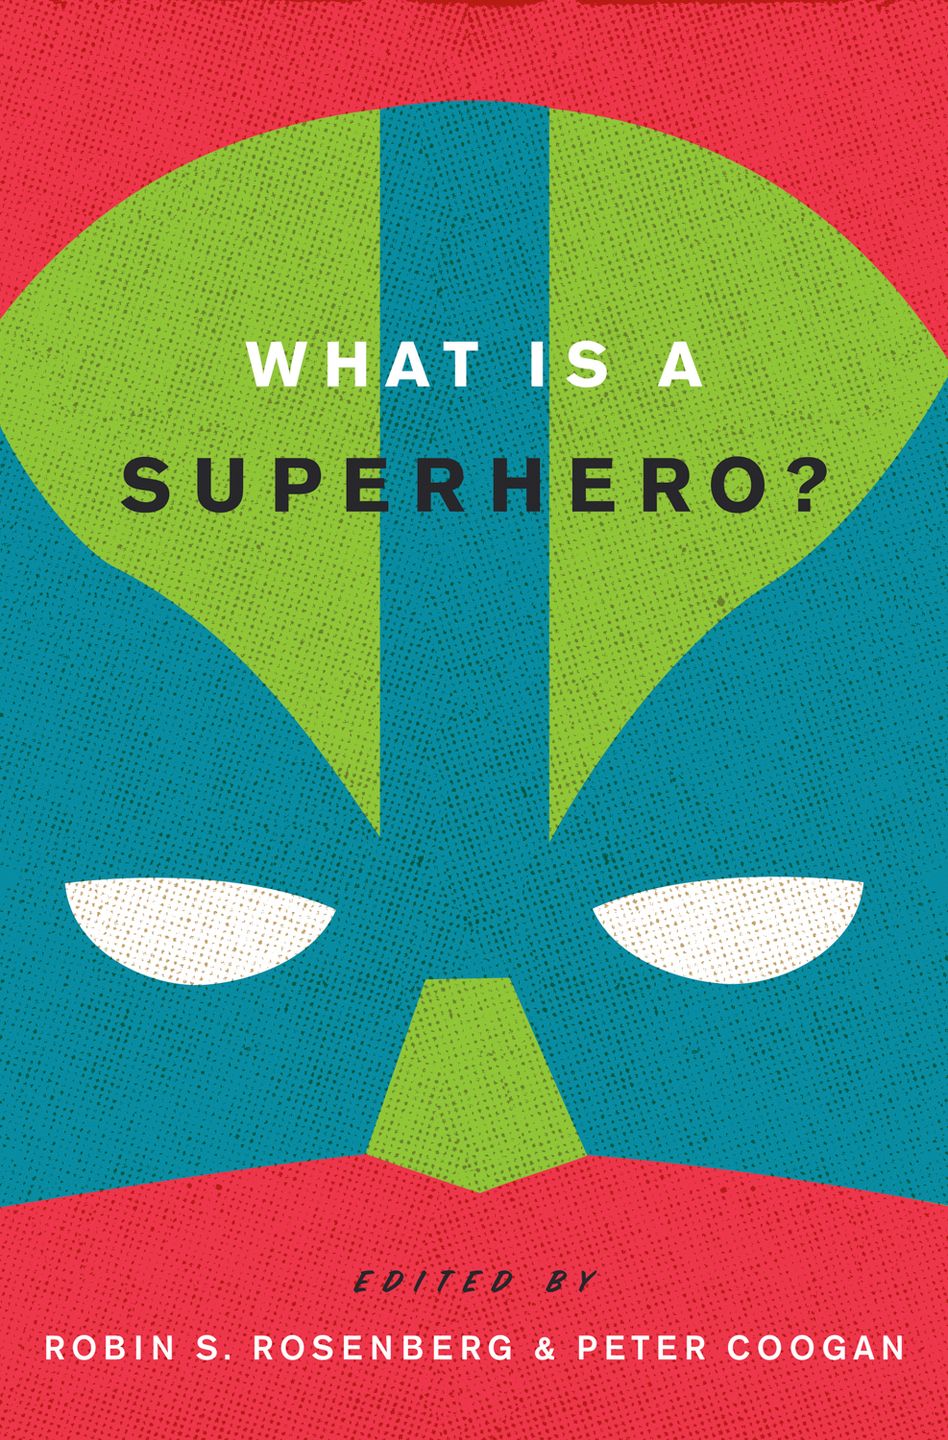 Robin Rosenberg's book on our fascination with superheroes